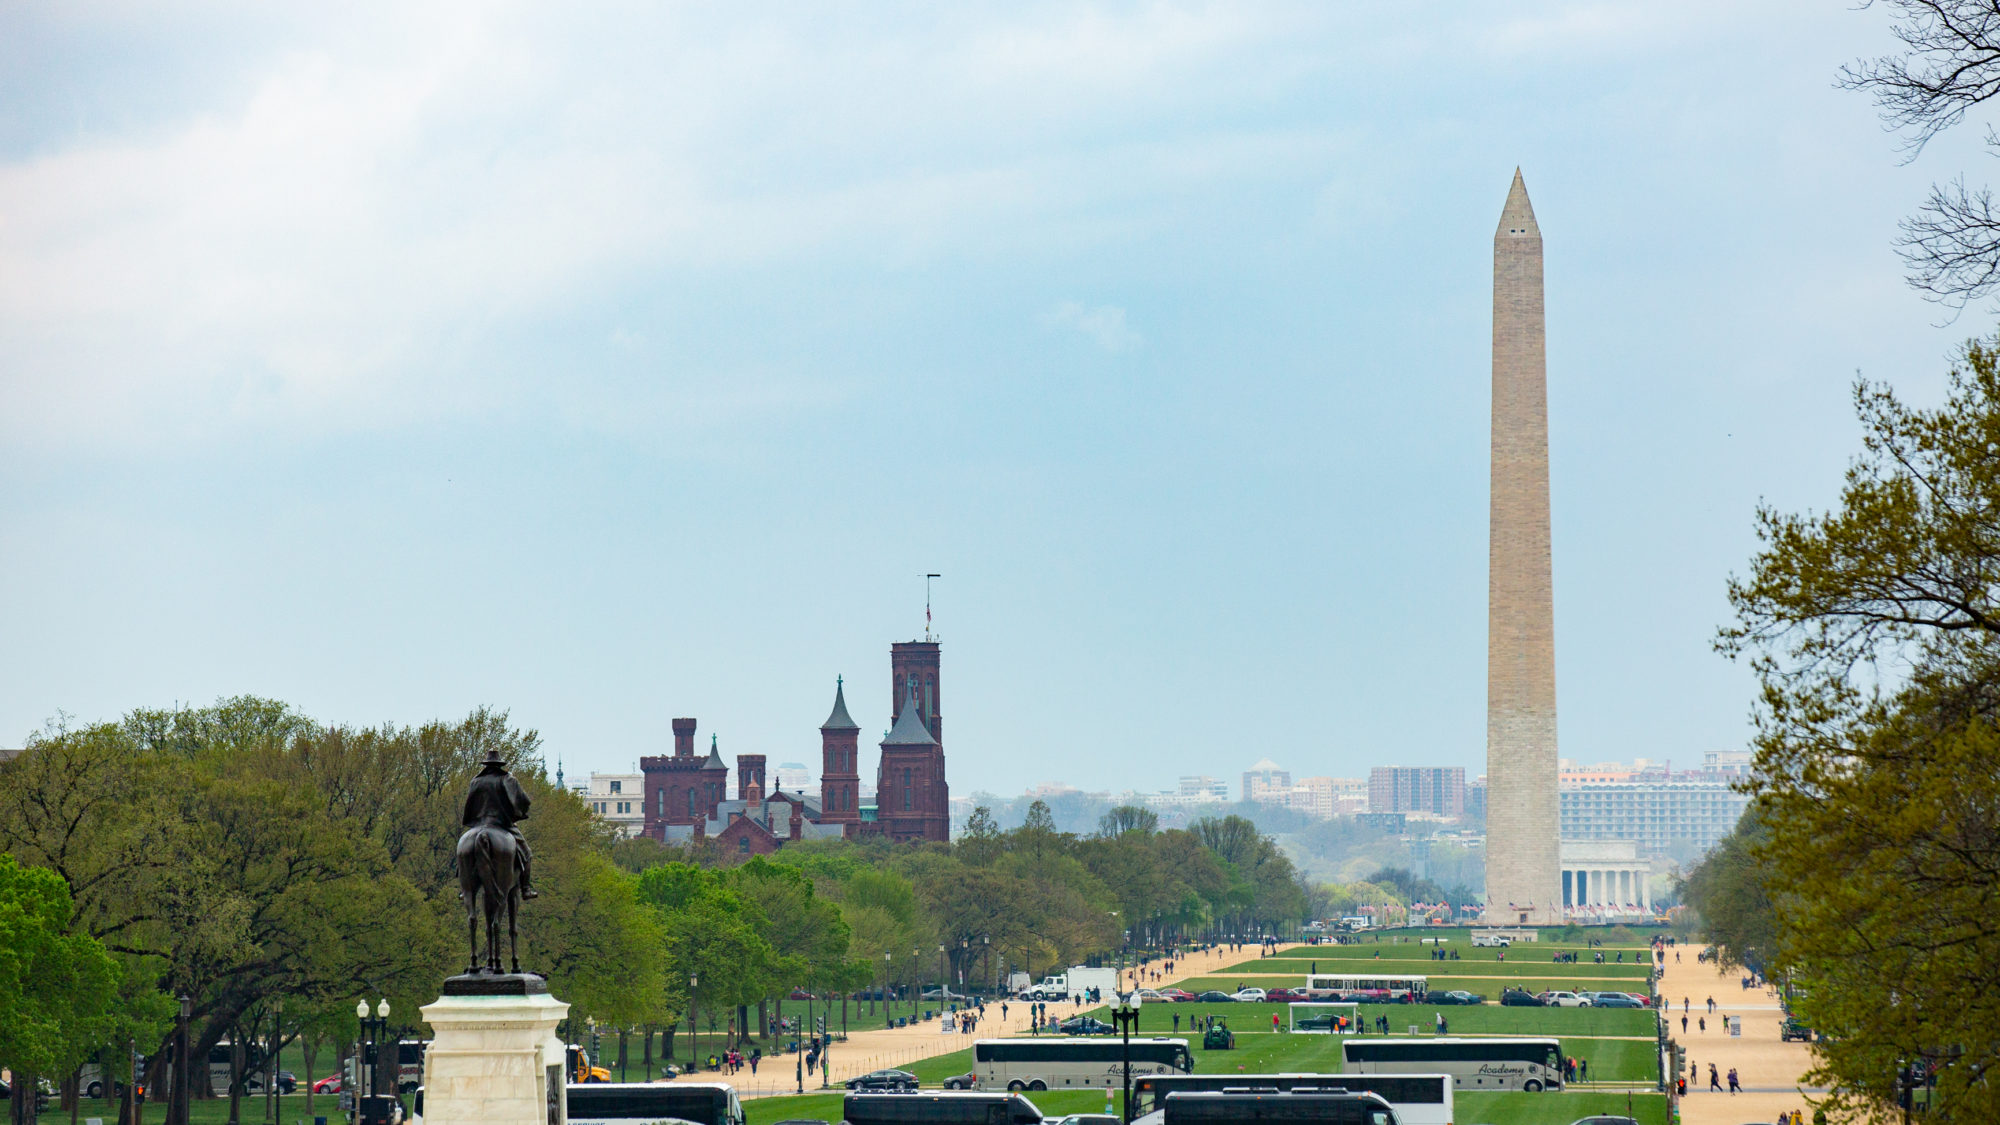 The Washington Monument towers over the National Mall.